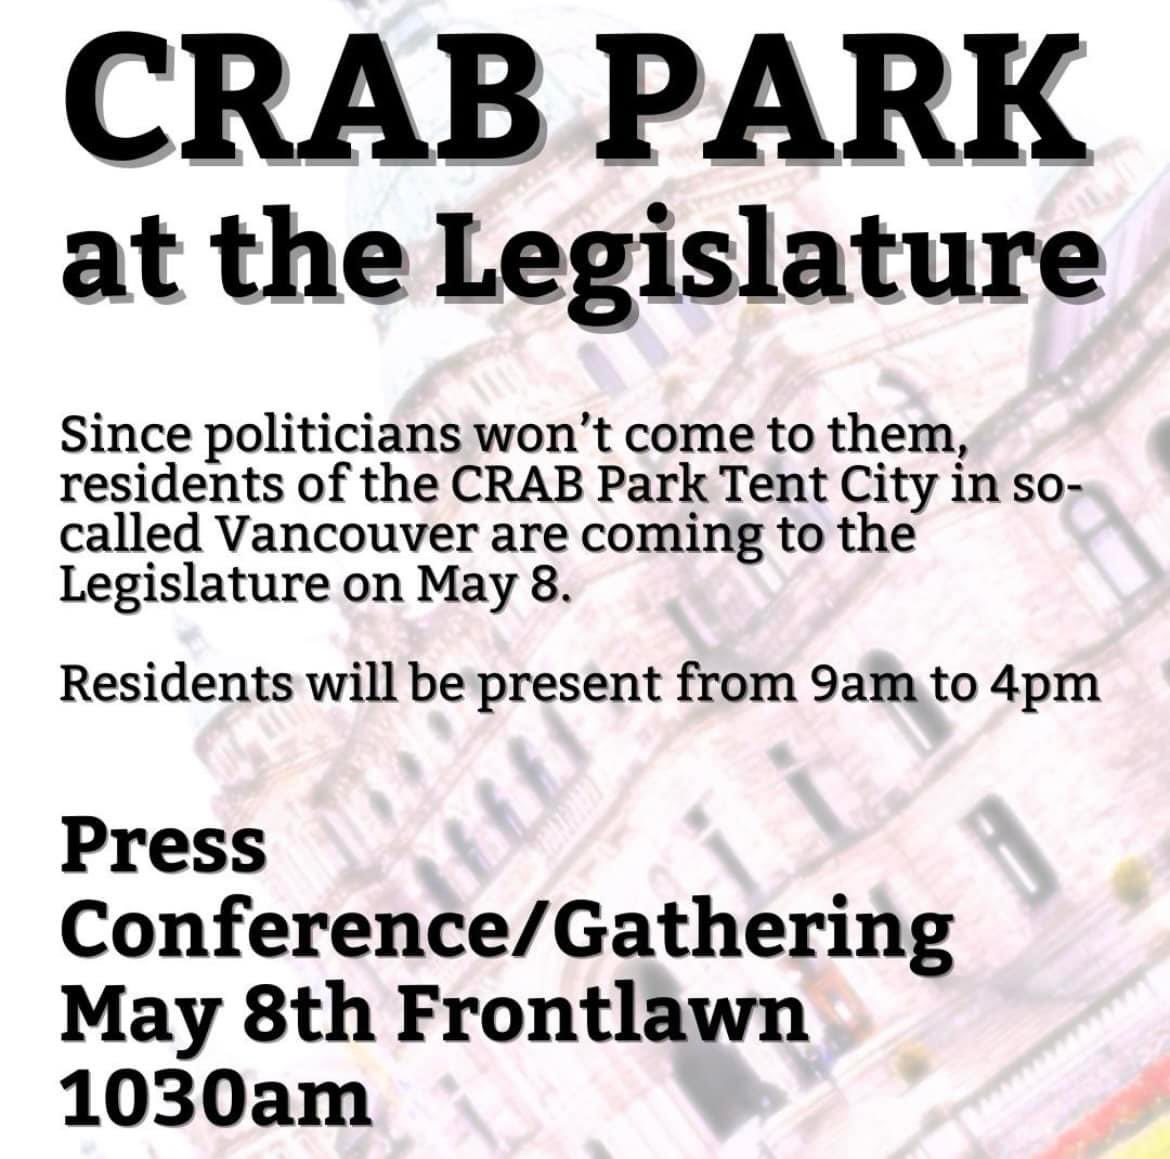 Tuesday May 7th & Wednesday May 8th RESIDENTS OF CRAB PARK WILL BE IN SO CALLED VICTORIA!! ✊✊🏕️🏕️ May 8th on front lawn of #Leg. from 9:30am-4:30pm for MLAs to meet with them and hear their concerns. Press Conference at 11:00 am on May 8th. #solidarity between Vic & Van! ✊